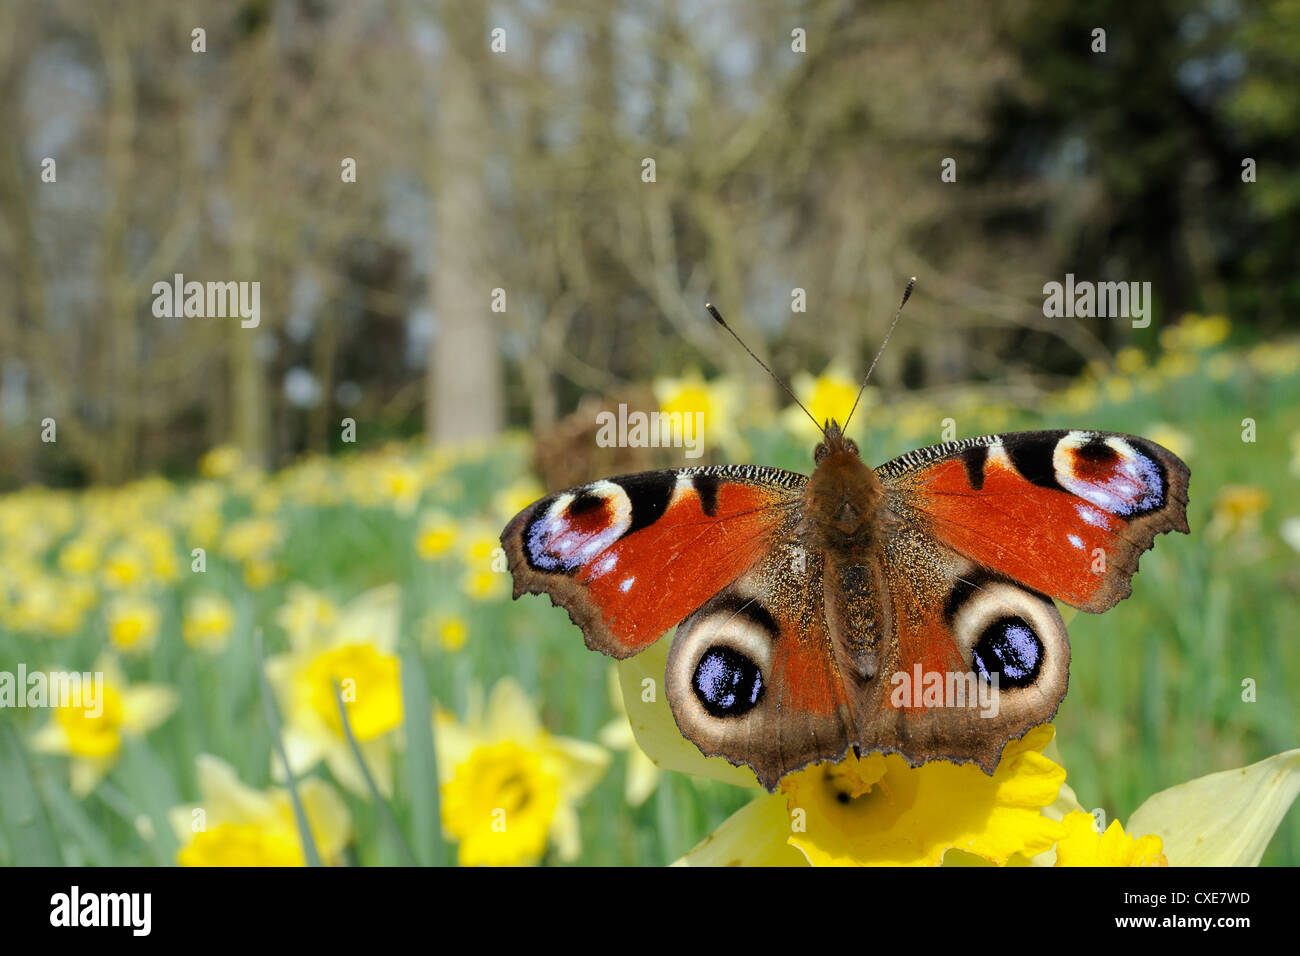 Peacock butterfly (Inachis io) on Wild daffodil (Narcissus pseudonarcissus), Wiltshire, England Stock Photo